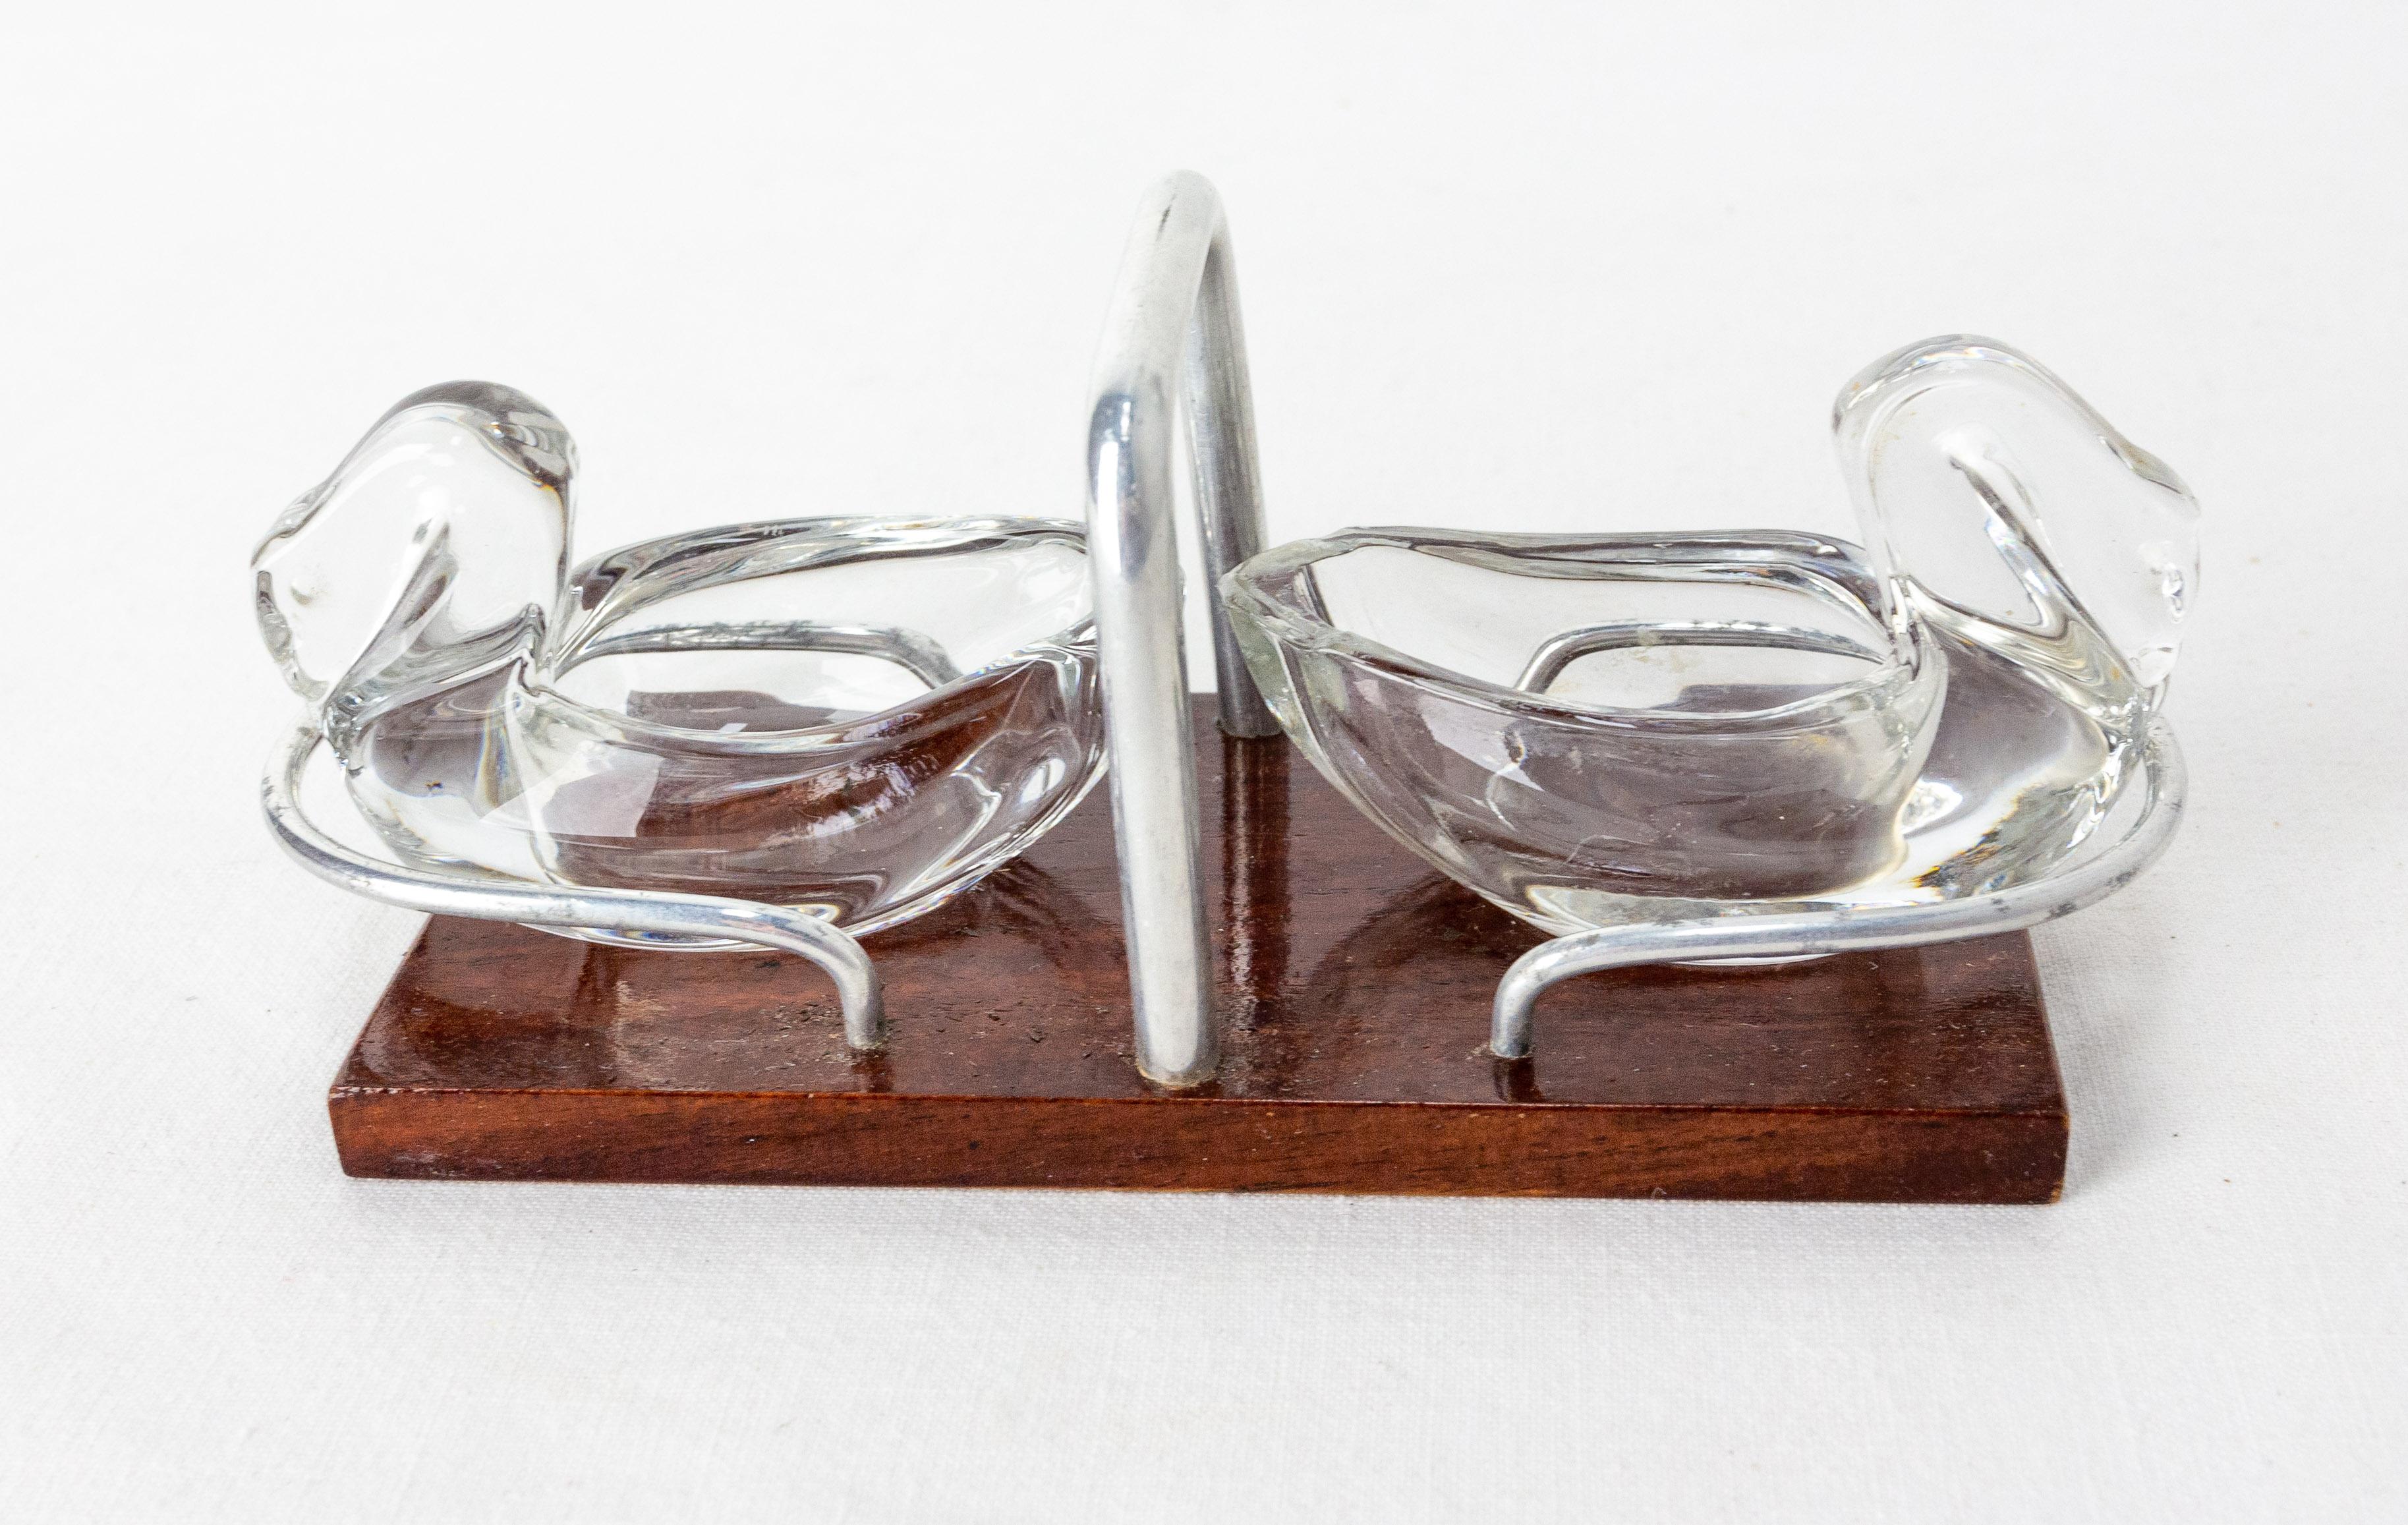 French set of salt and pepper shaker on its stand. The glass salt and pepper shaker are into swans.
Chrome, teak and glass,
French, circa 1960
Good condition

Shipping:
6 / 15 / 6.5 0.2 g.